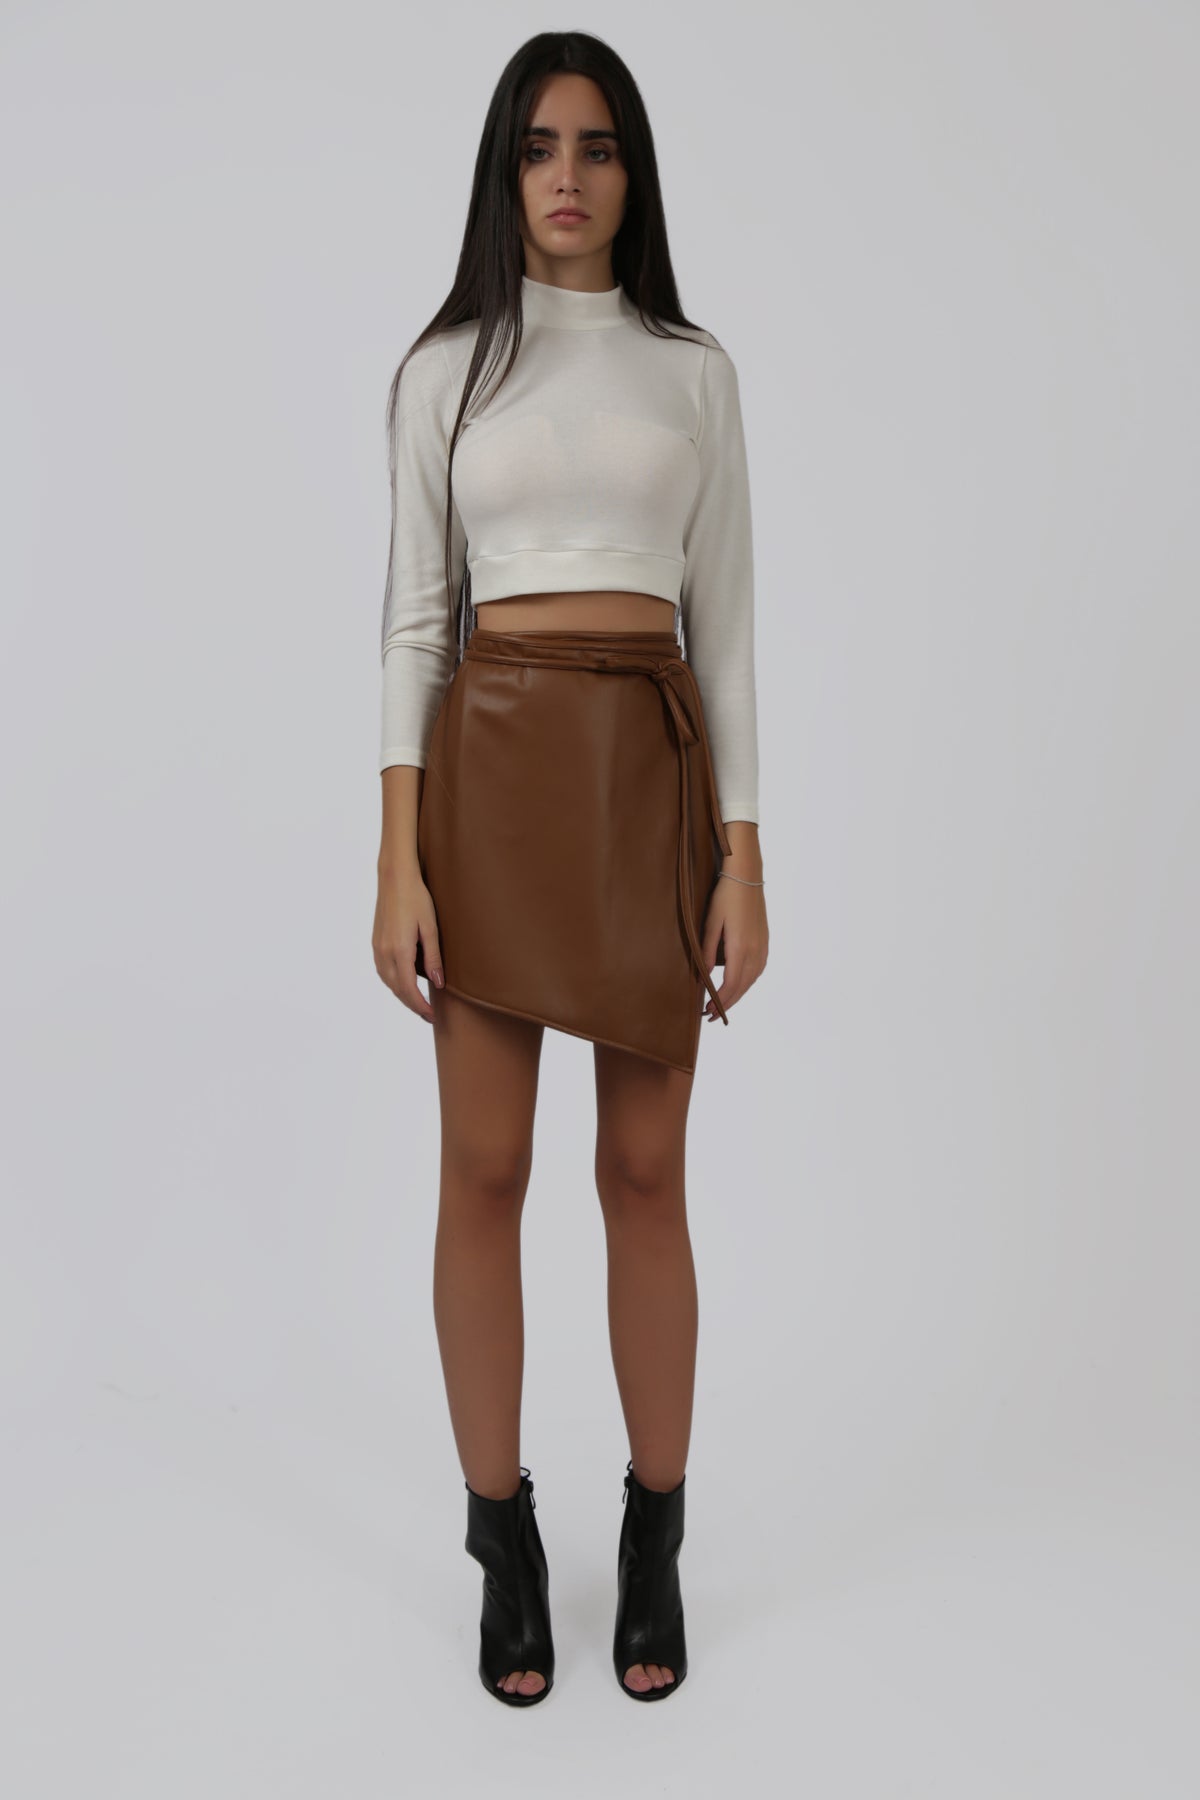 Wrap Around Faux Leather Skirt with Drawstring